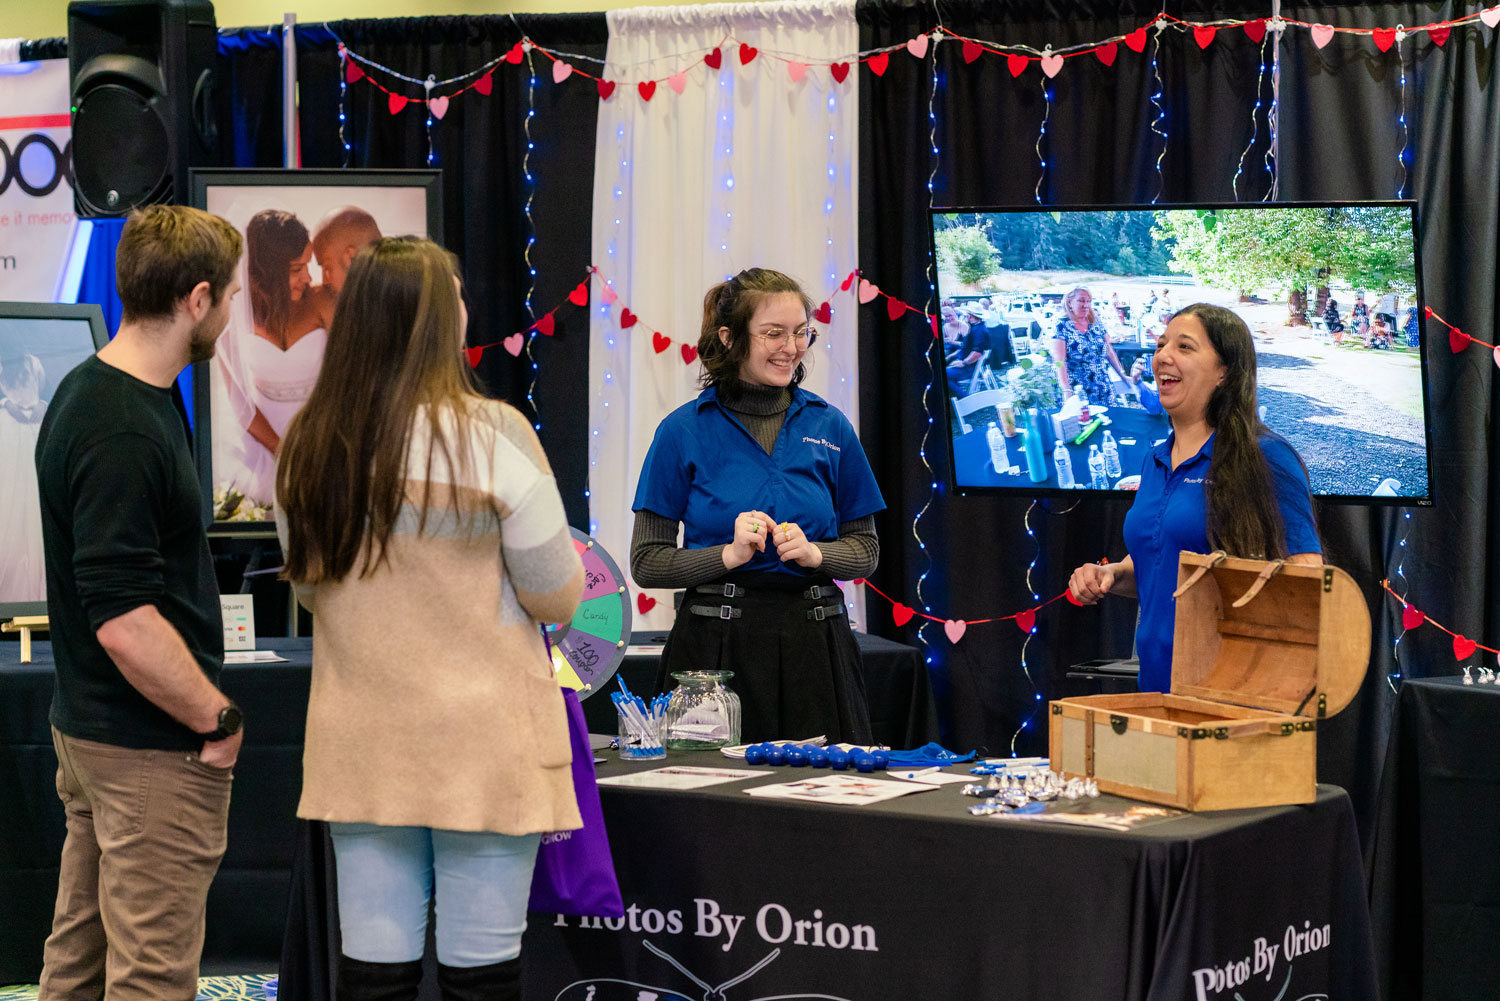 Two women from Photos By Orion talking with two wedding show participants at the Portland Bridal Show.